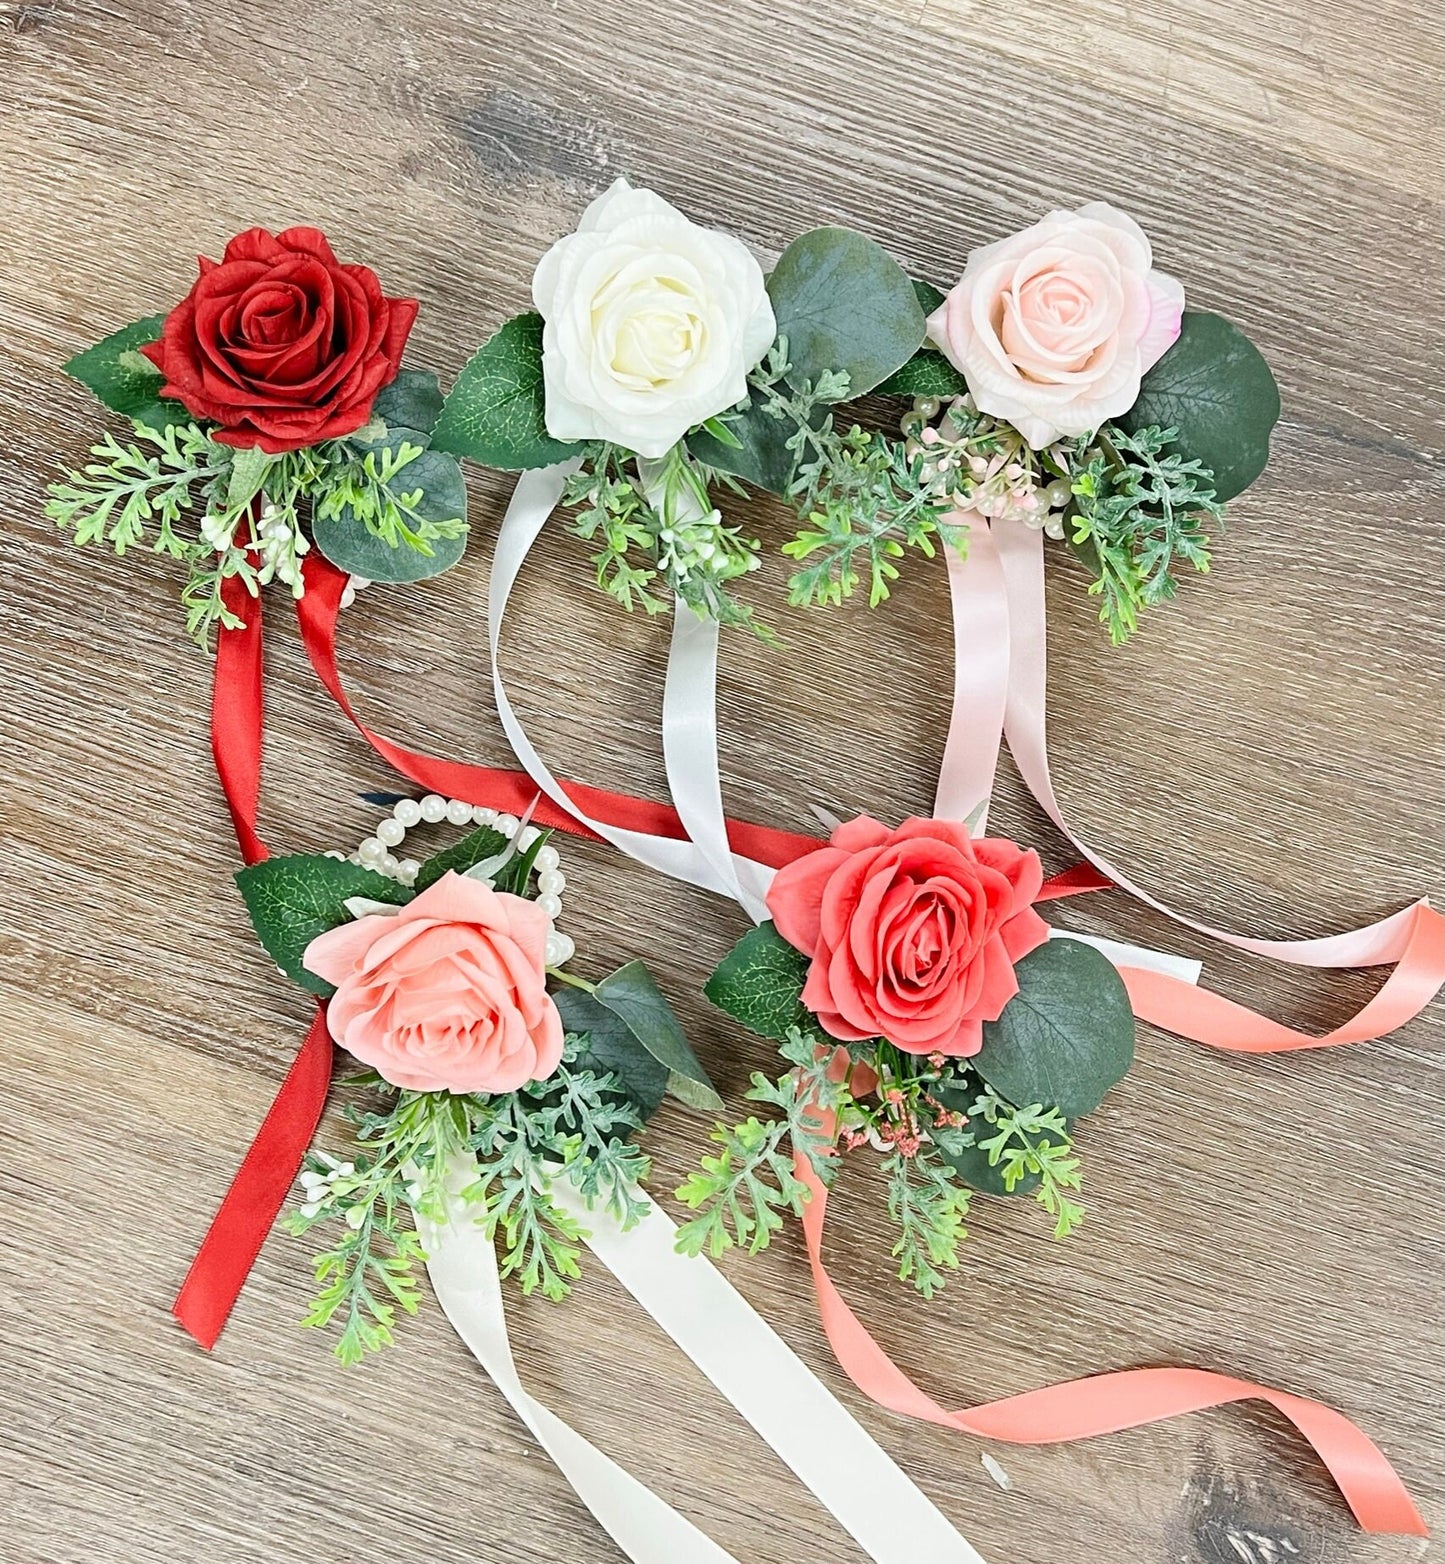 Customizable Lifelike Rose Corsage & Boutonniere Set for Special Occasions